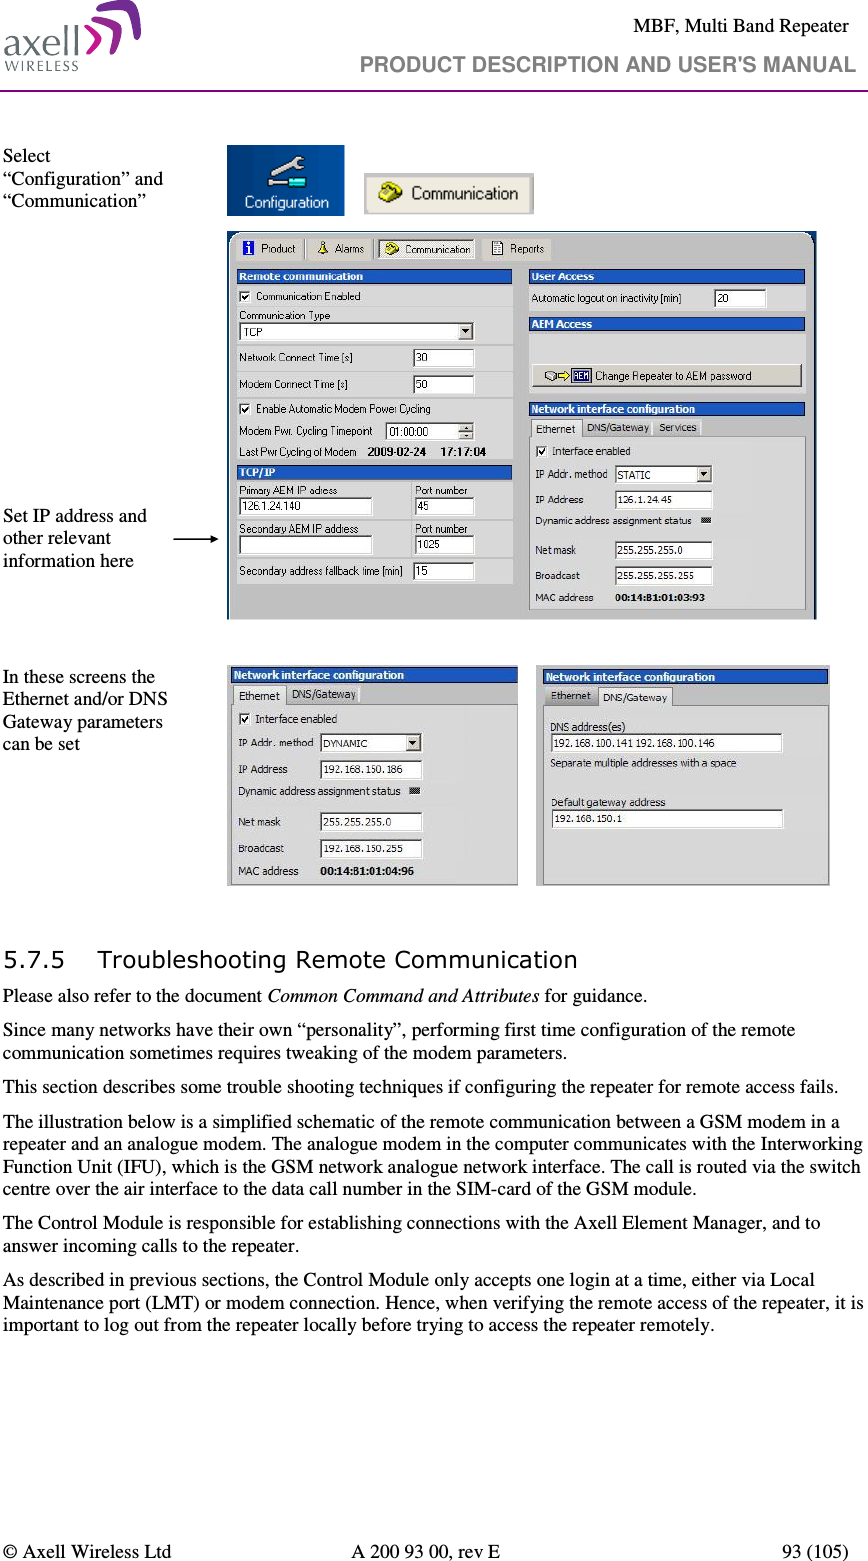     MBF, Multi Band Repeater                                     PRODUCT DESCRIPTION AND USER&apos;S MANUAL   © Axell Wireless Ltd  A 200 93 00, rev E  93 (105)  Select “Configuration” and “Communication”                 Set IP address and other relevant information here    In these screens the Ethernet and/or DNS Gateway parameters can be set         5.7.5 Troubleshooting Remote Communication Please also refer to the document Common Command and Attributes for guidance.  Since many networks have their own “personality”, performing first time configuration of the remote communication sometimes requires tweaking of the modem parameters. This section describes some trouble shooting techniques if configuring the repeater for remote access fails.  The illustration below is a simplified schematic of the remote communication between a GSM modem in a repeater and an analogue modem. The analogue modem in the computer communicates with the Interworking Function Unit (IFU), which is the GSM network analogue network interface. The call is routed via the switch centre over the air interface to the data call number in the SIM-card of the GSM module. The Control Module is responsible for establishing connections with the Axell Element Manager, and to answer incoming calls to the repeater.  As described in previous sections, the Control Module only accepts one login at a time, either via Local Maintenance port (LMT) or modem connection. Hence, when verifying the remote access of the repeater, it is important to log out from the repeater locally before trying to access the repeater remotely.  